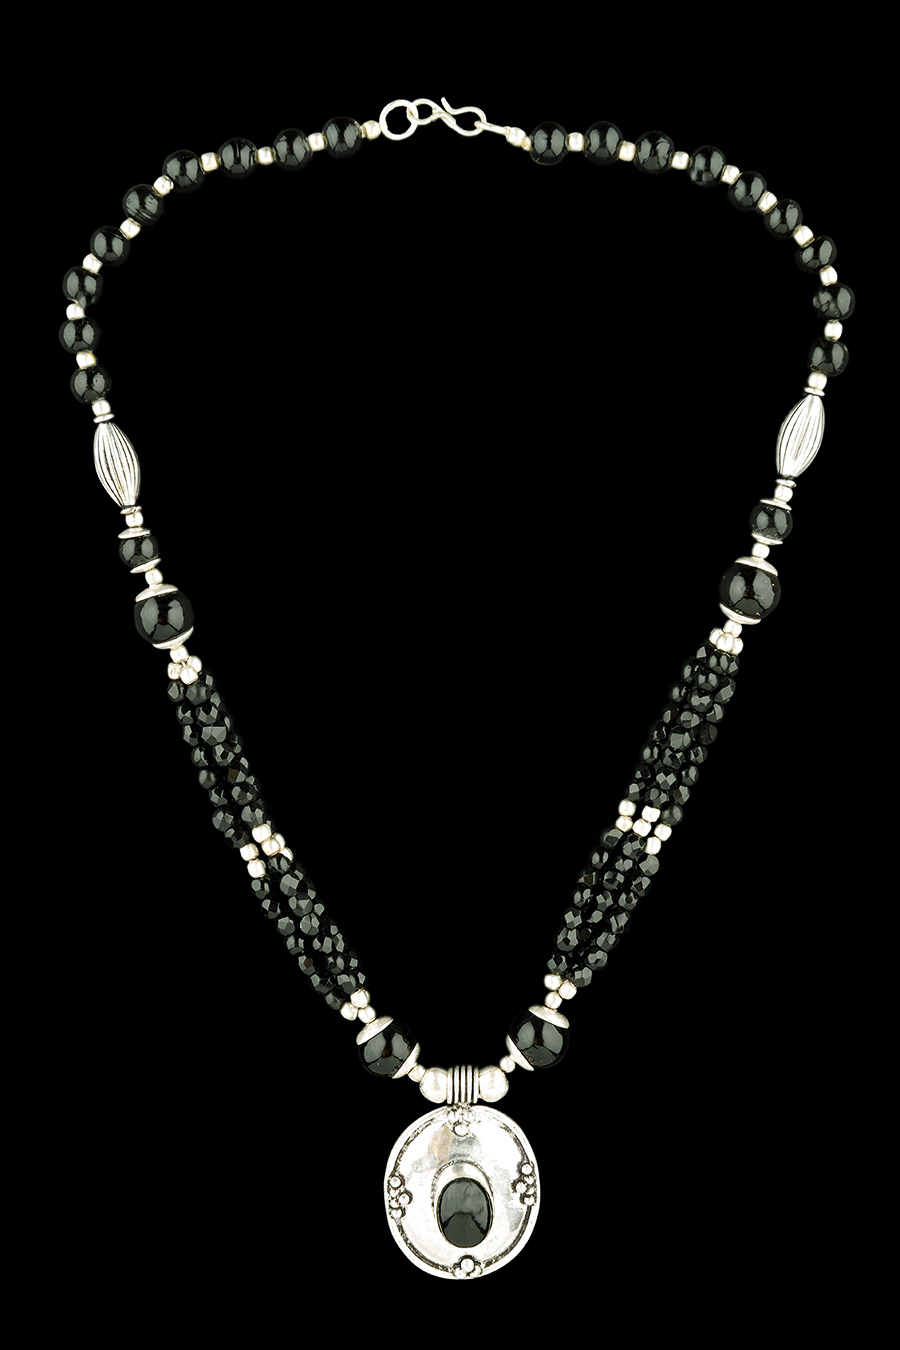 Black Onyx Cut Stone Necklace With Pendant